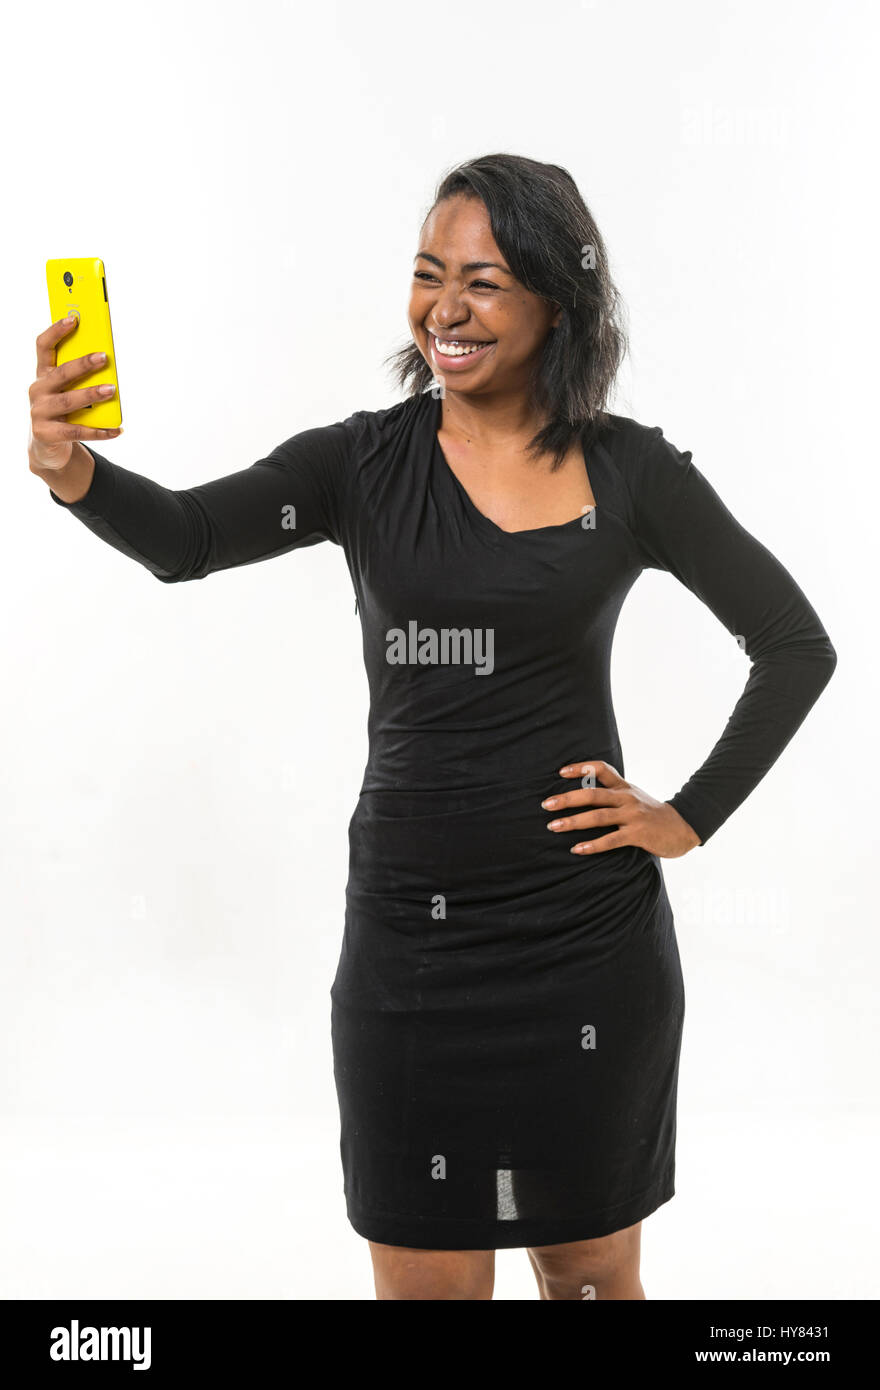 An African woman uses a mobile device in a studio environment. Stock Photo